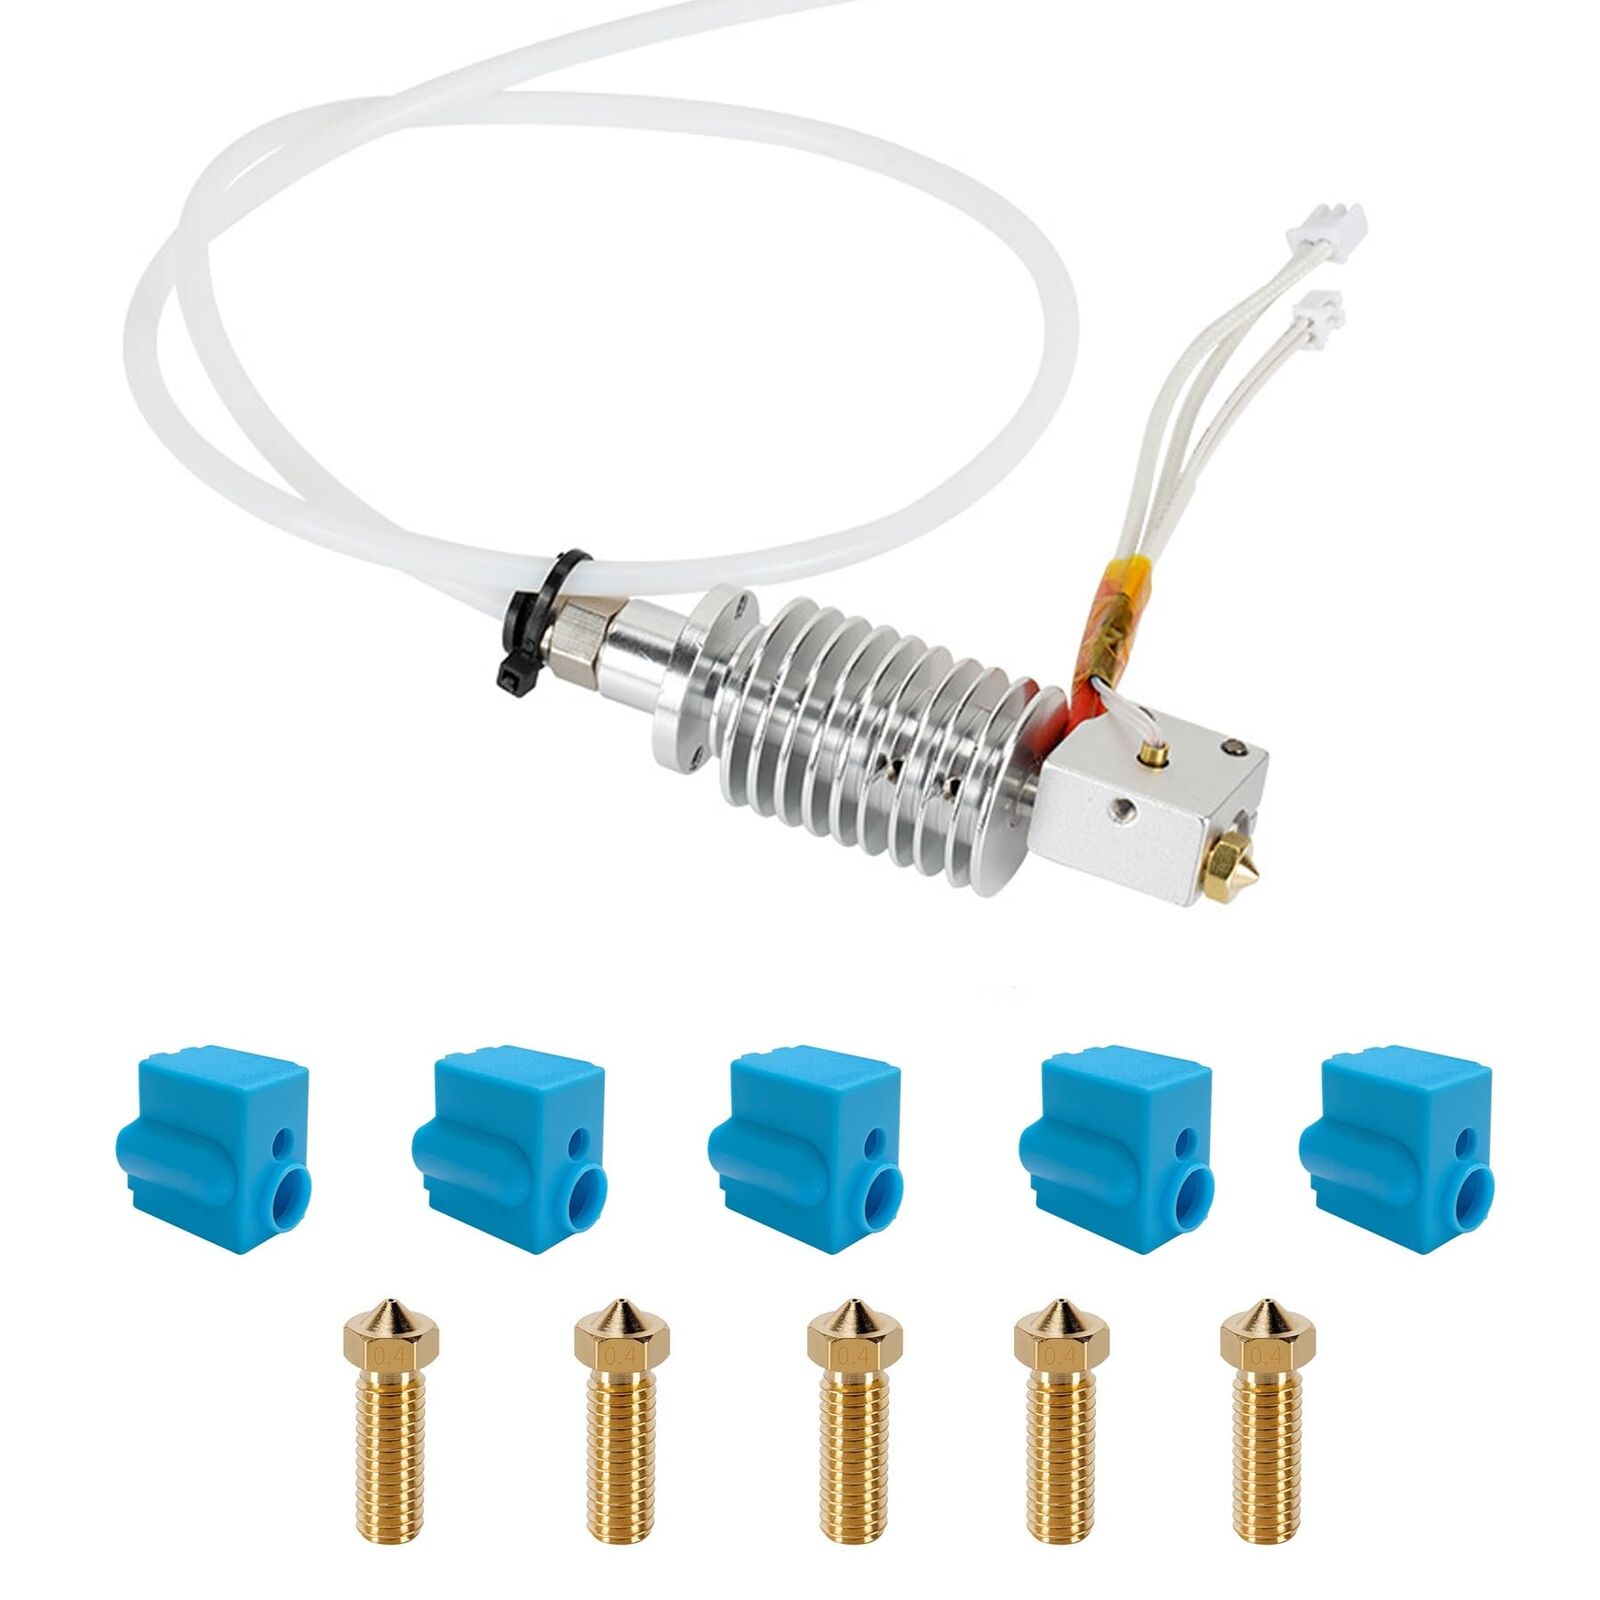 Hotend Kit for Anycubic Vyper, 3D Printer Assembled Hotend Kit with 5PCS Sili...